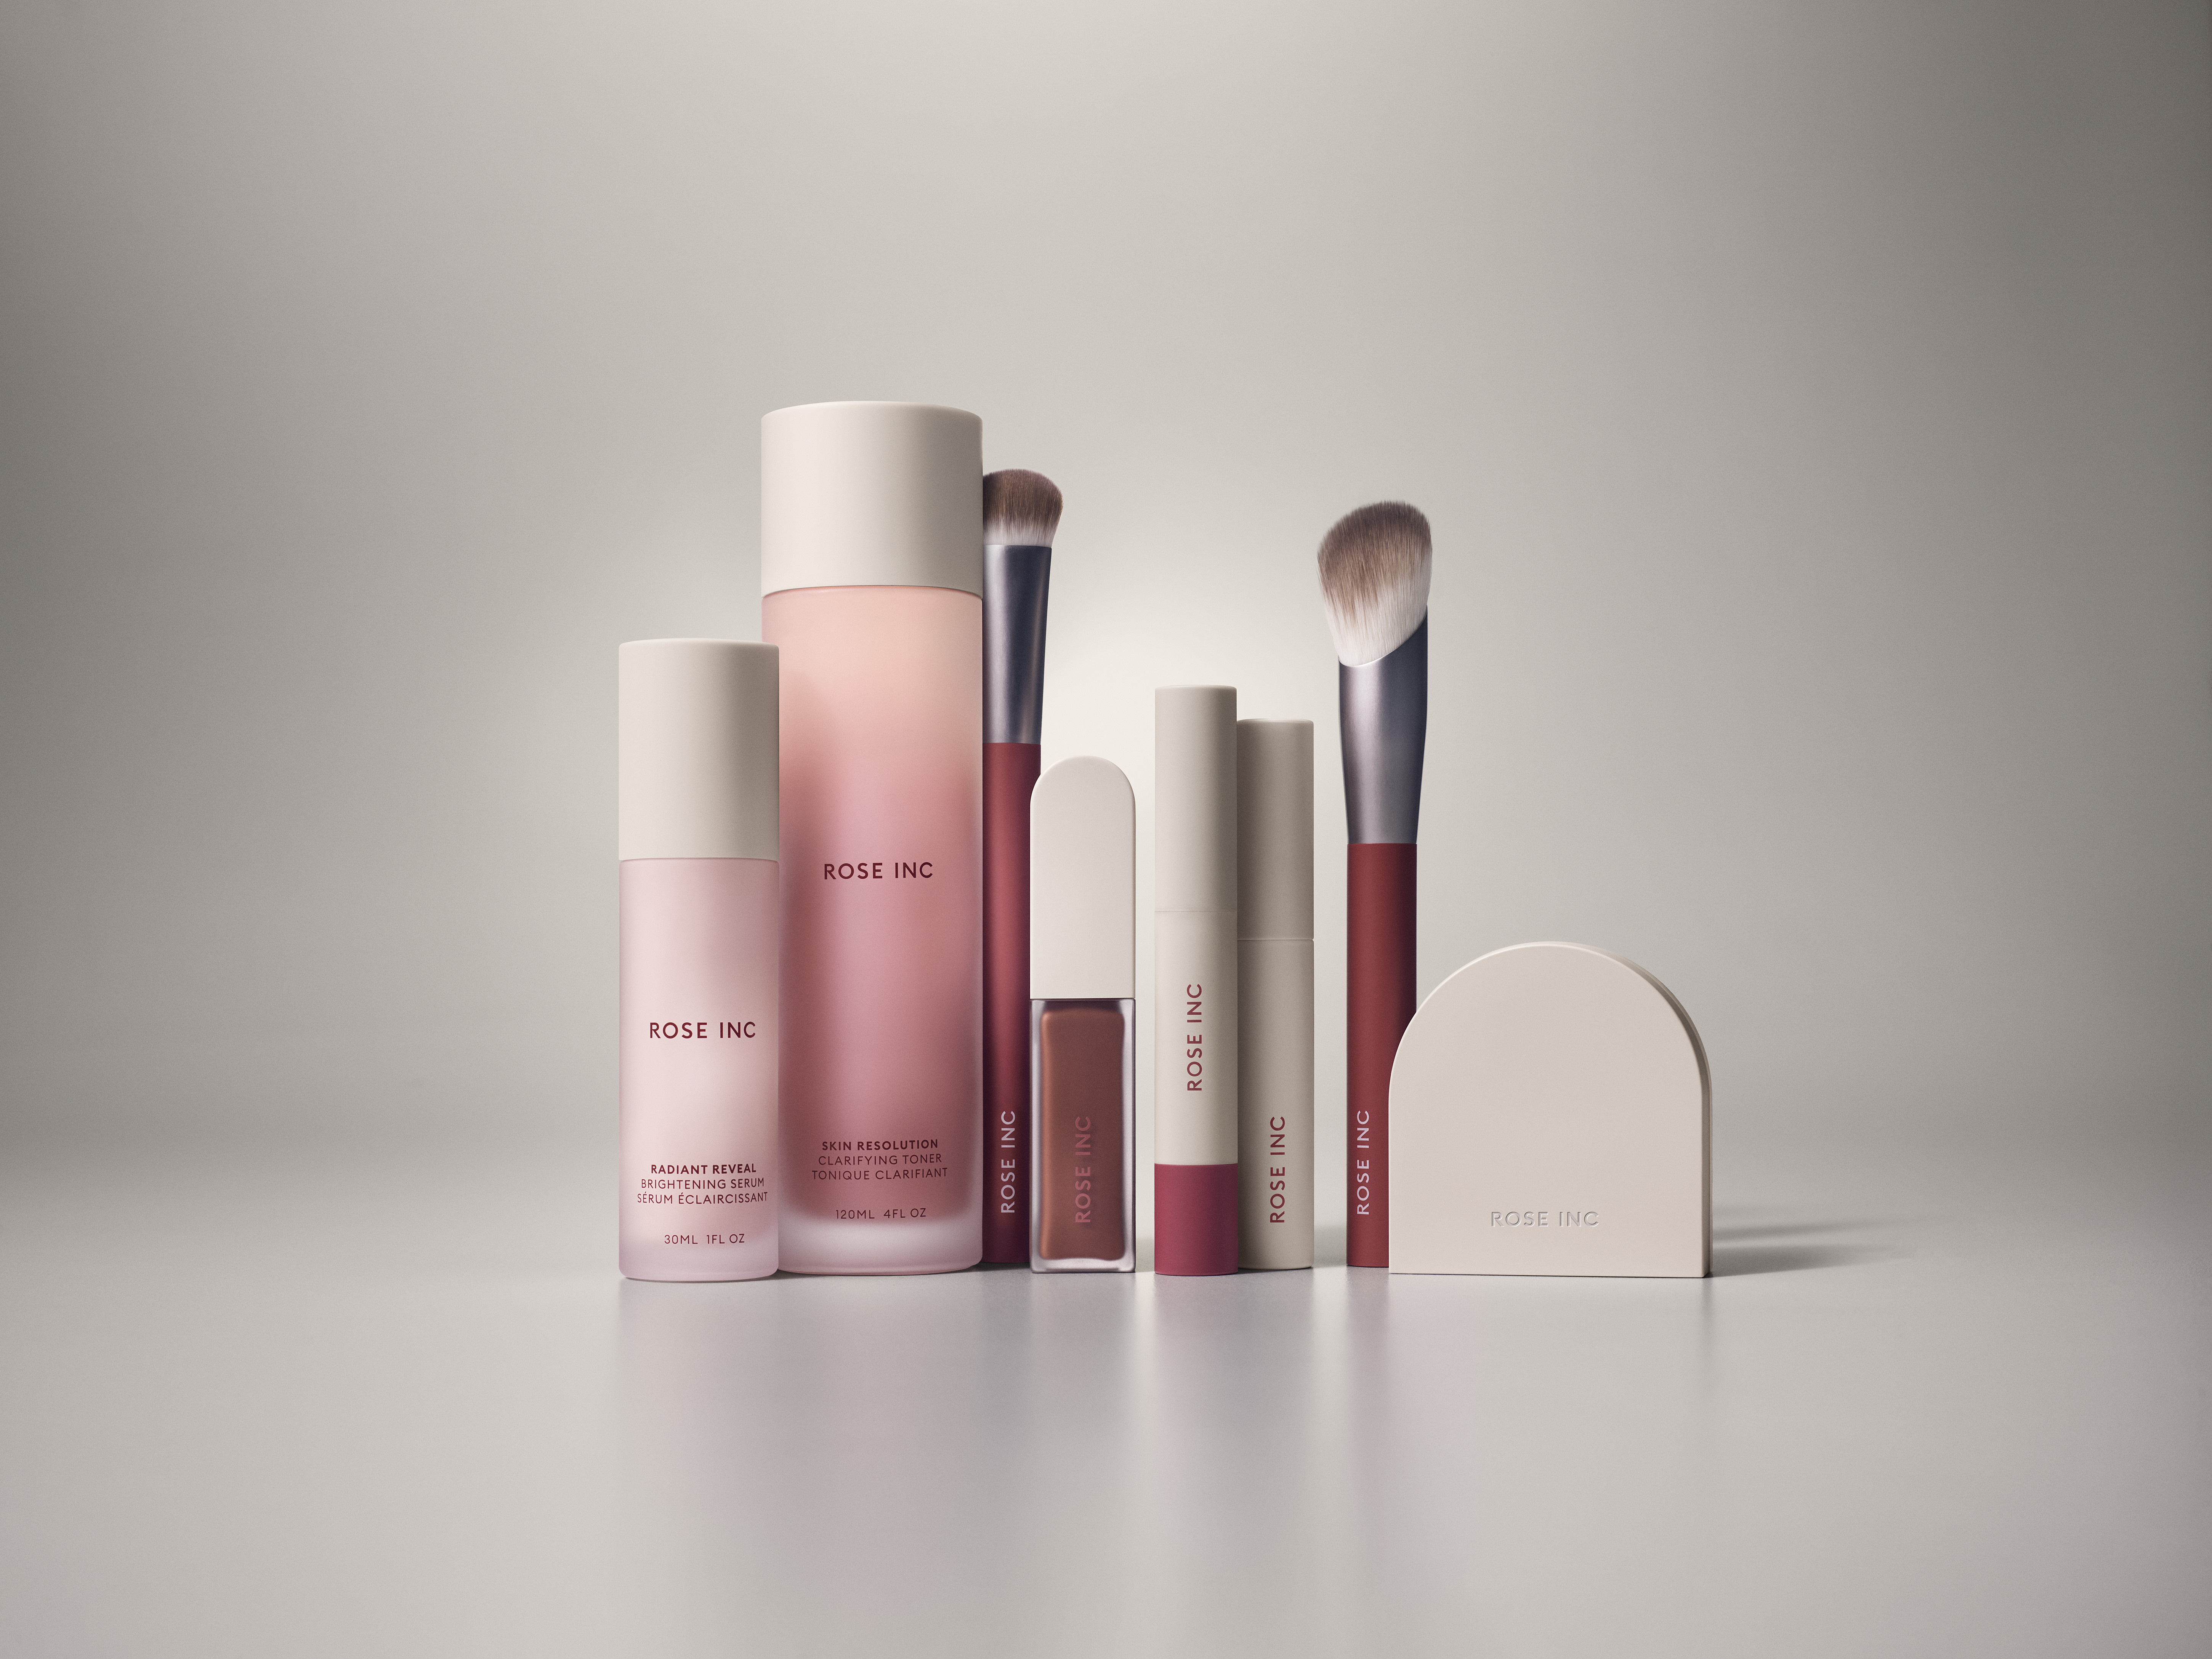 Lineup of Rose Inc beauty products.